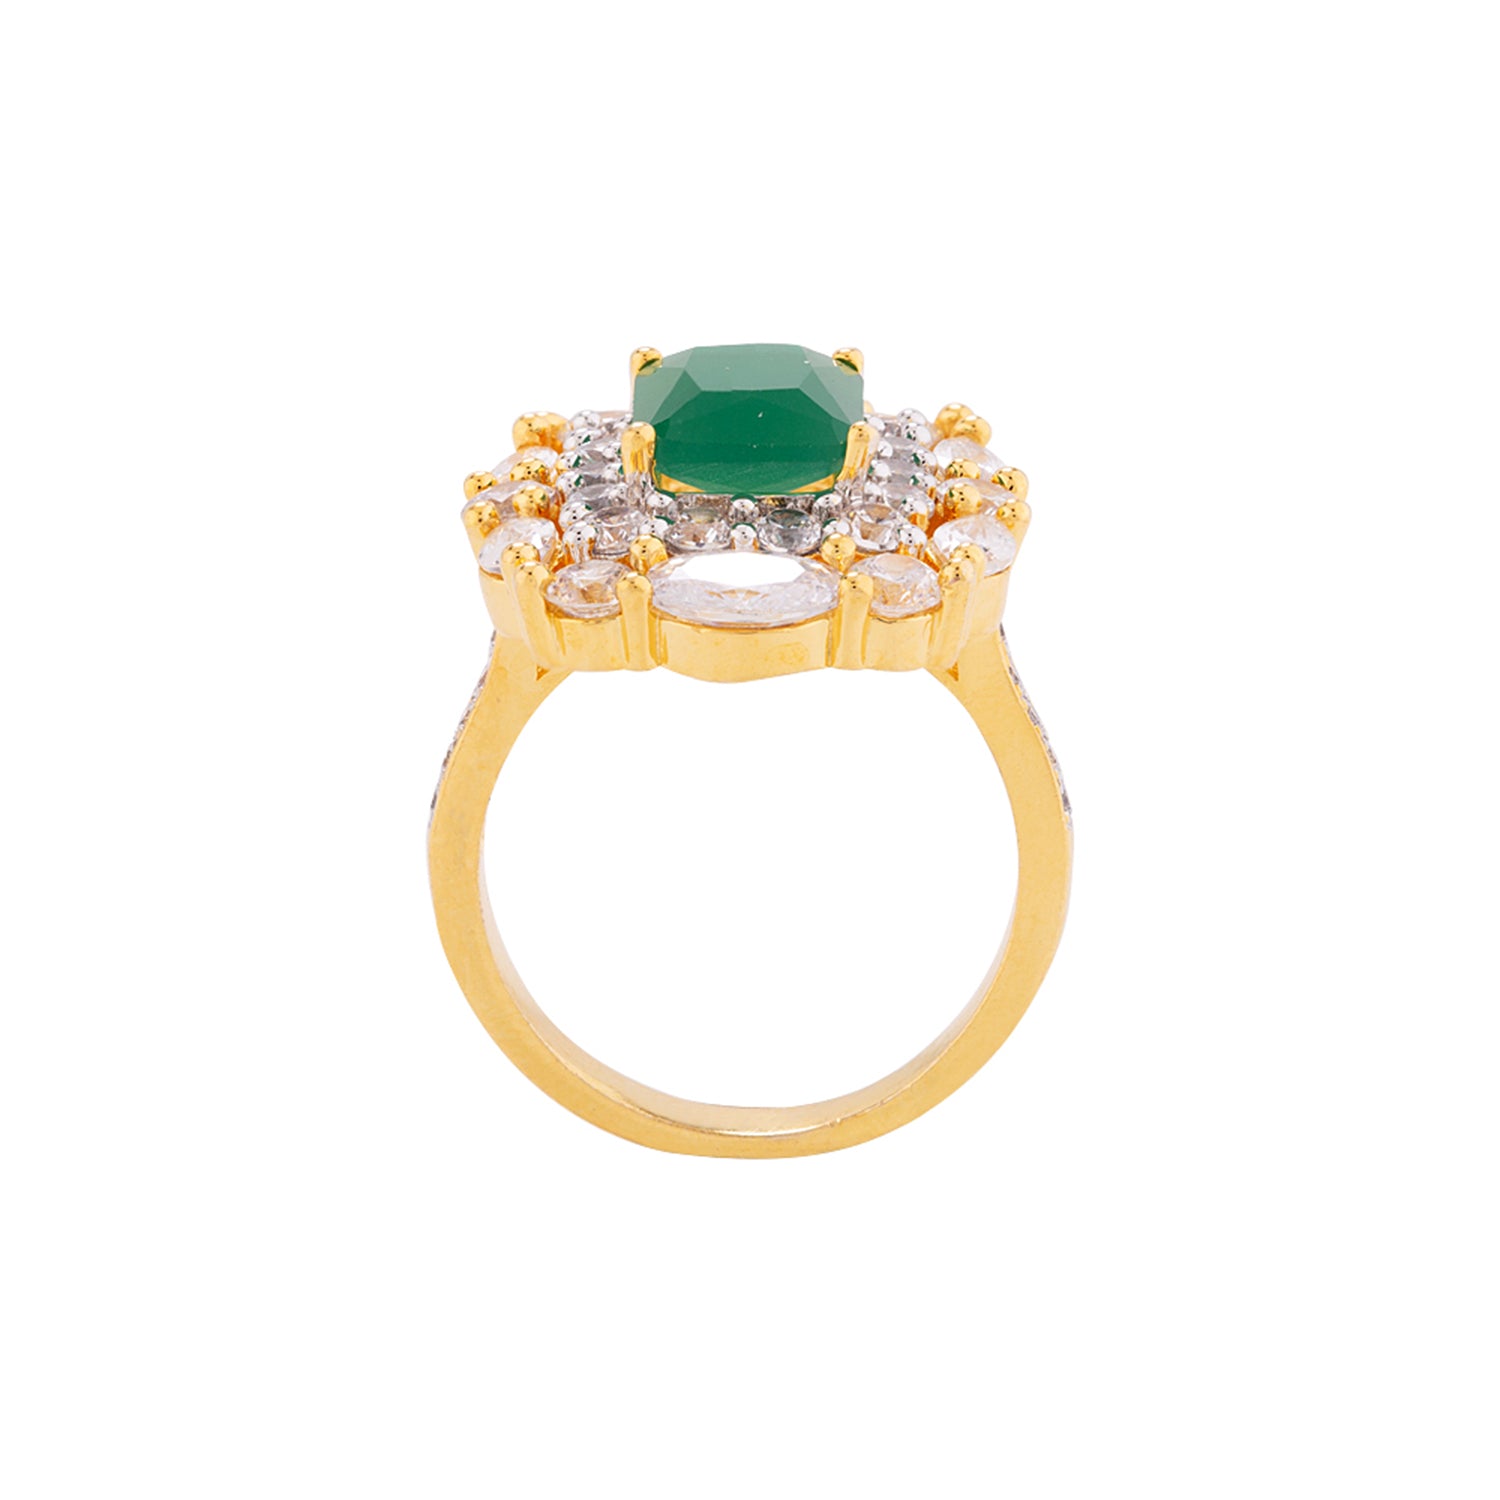 Green and White American Diamond Gems Ring